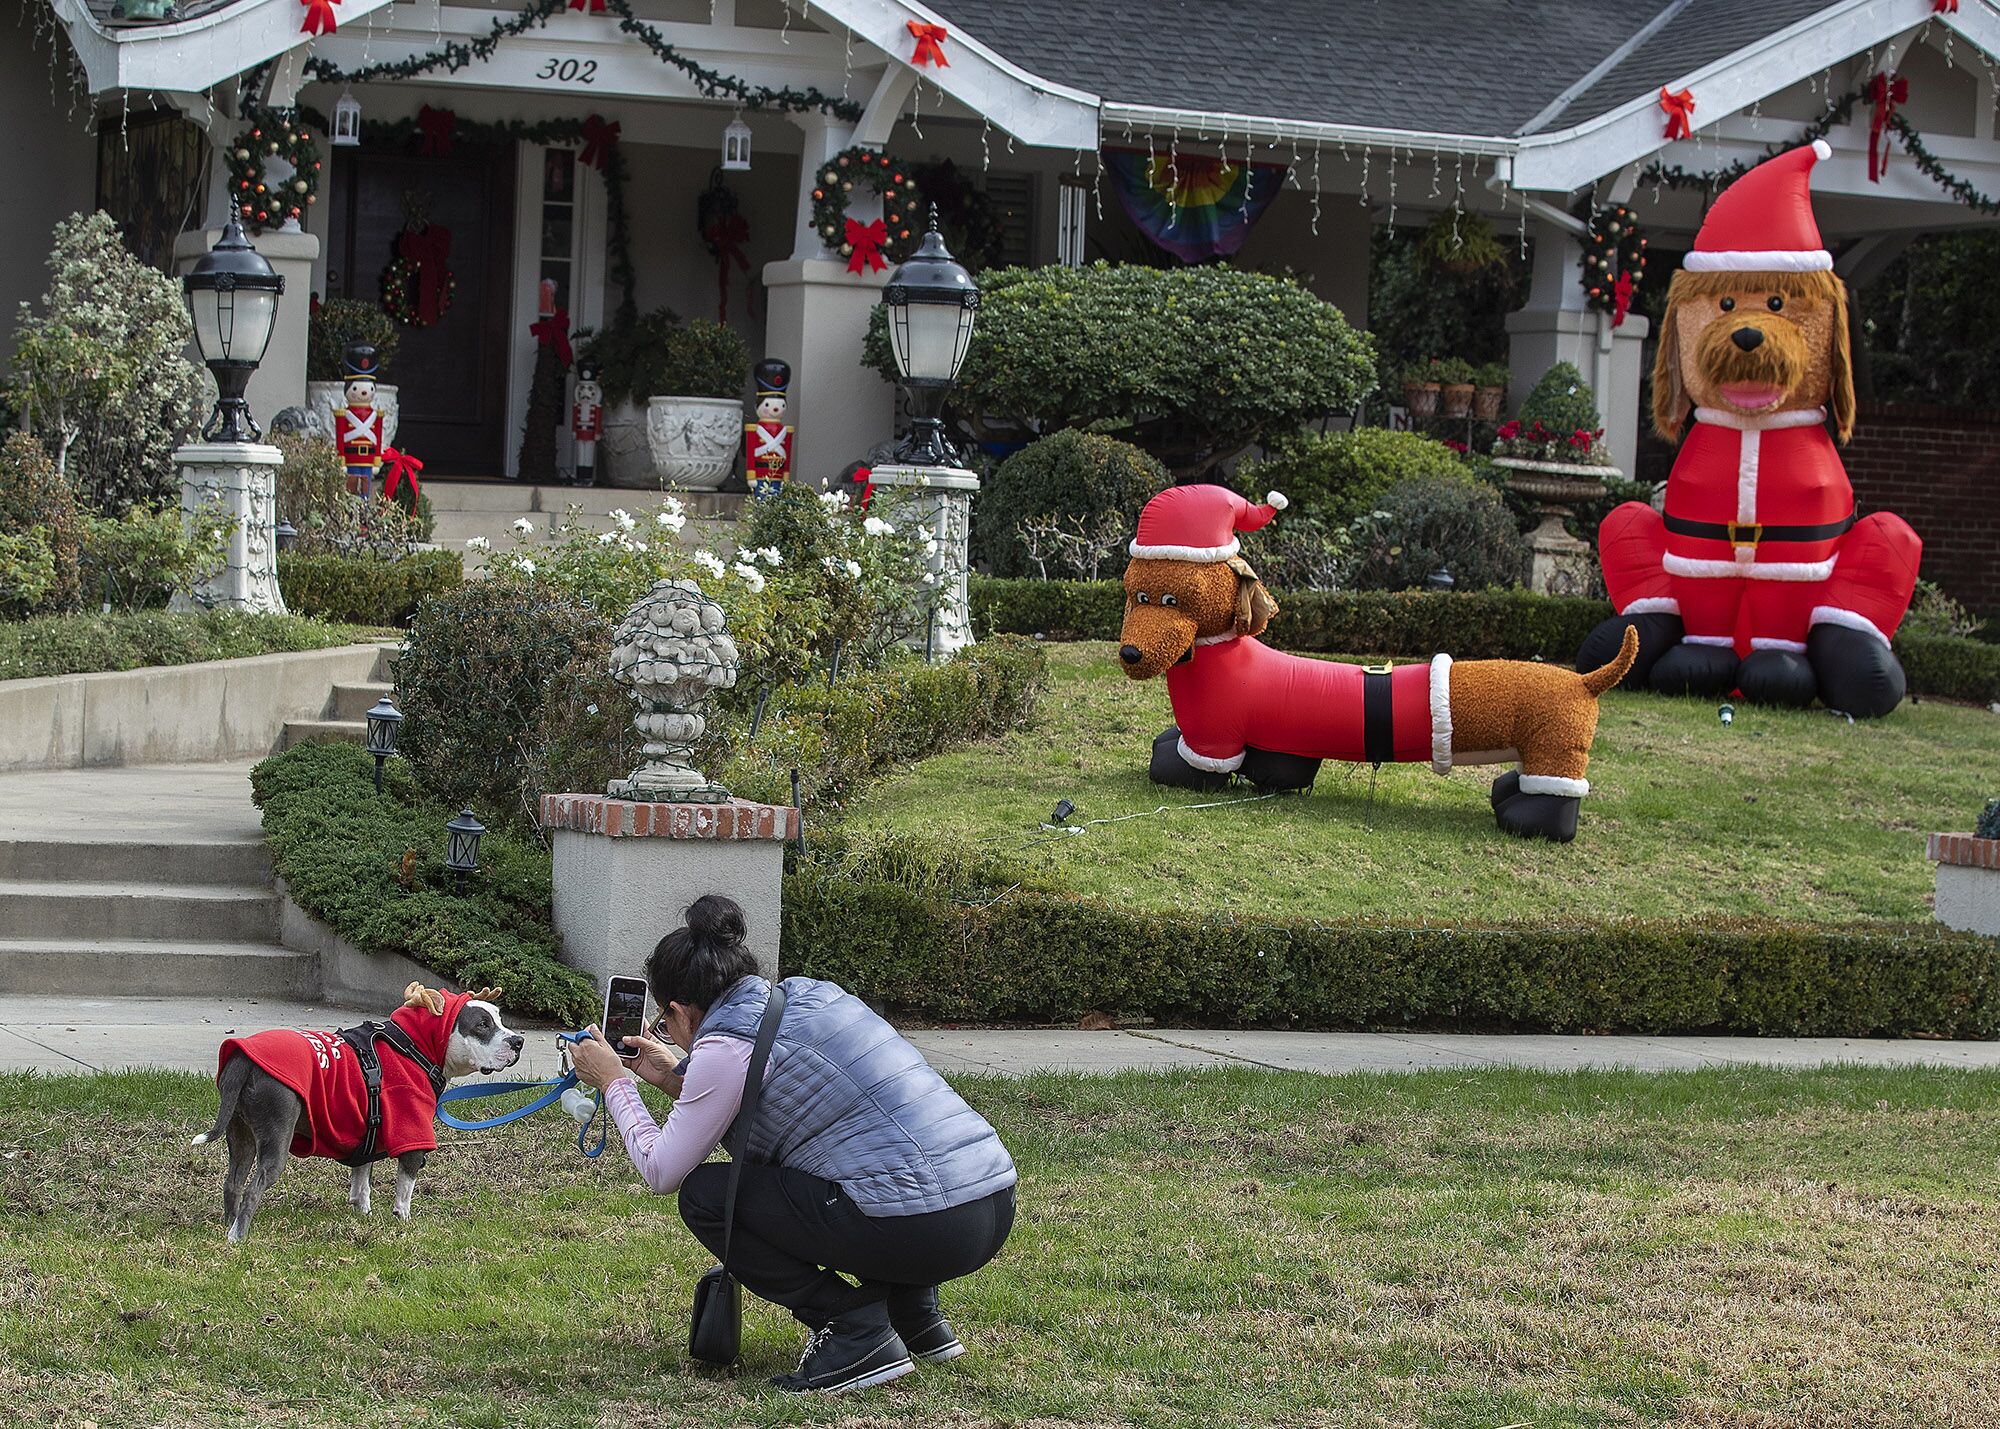 Nohemi Ortiz, 56, photographs her 5 year old pitbull, Snoopy, in front of a home with dog themed Christmas decorations 